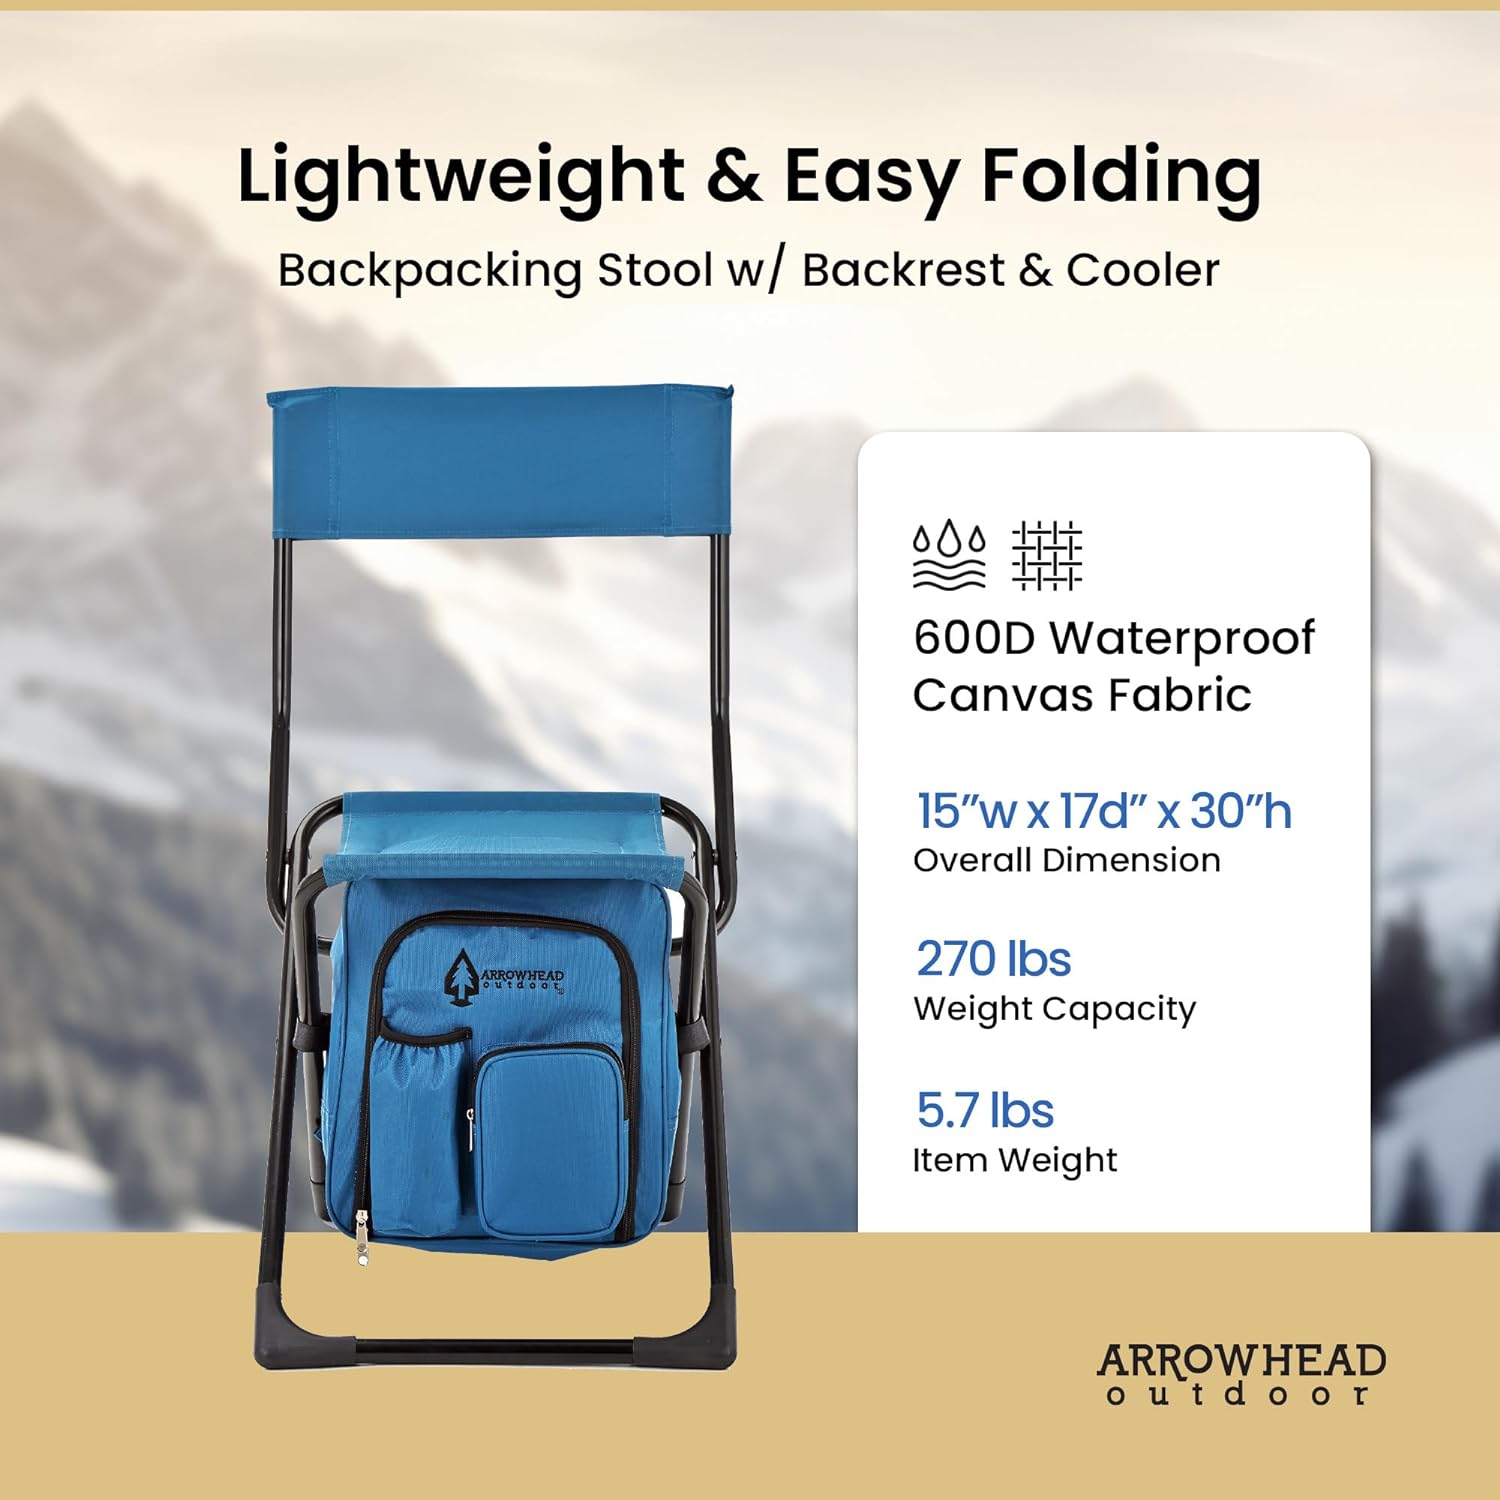 ARROWHEAD OUTDOOR Multi Function 3 In 1 Compact Camp Chair Backpack, Stool  Insulated Cooler, W External Pockets Storage Bag, Lightweig From 42,71 €